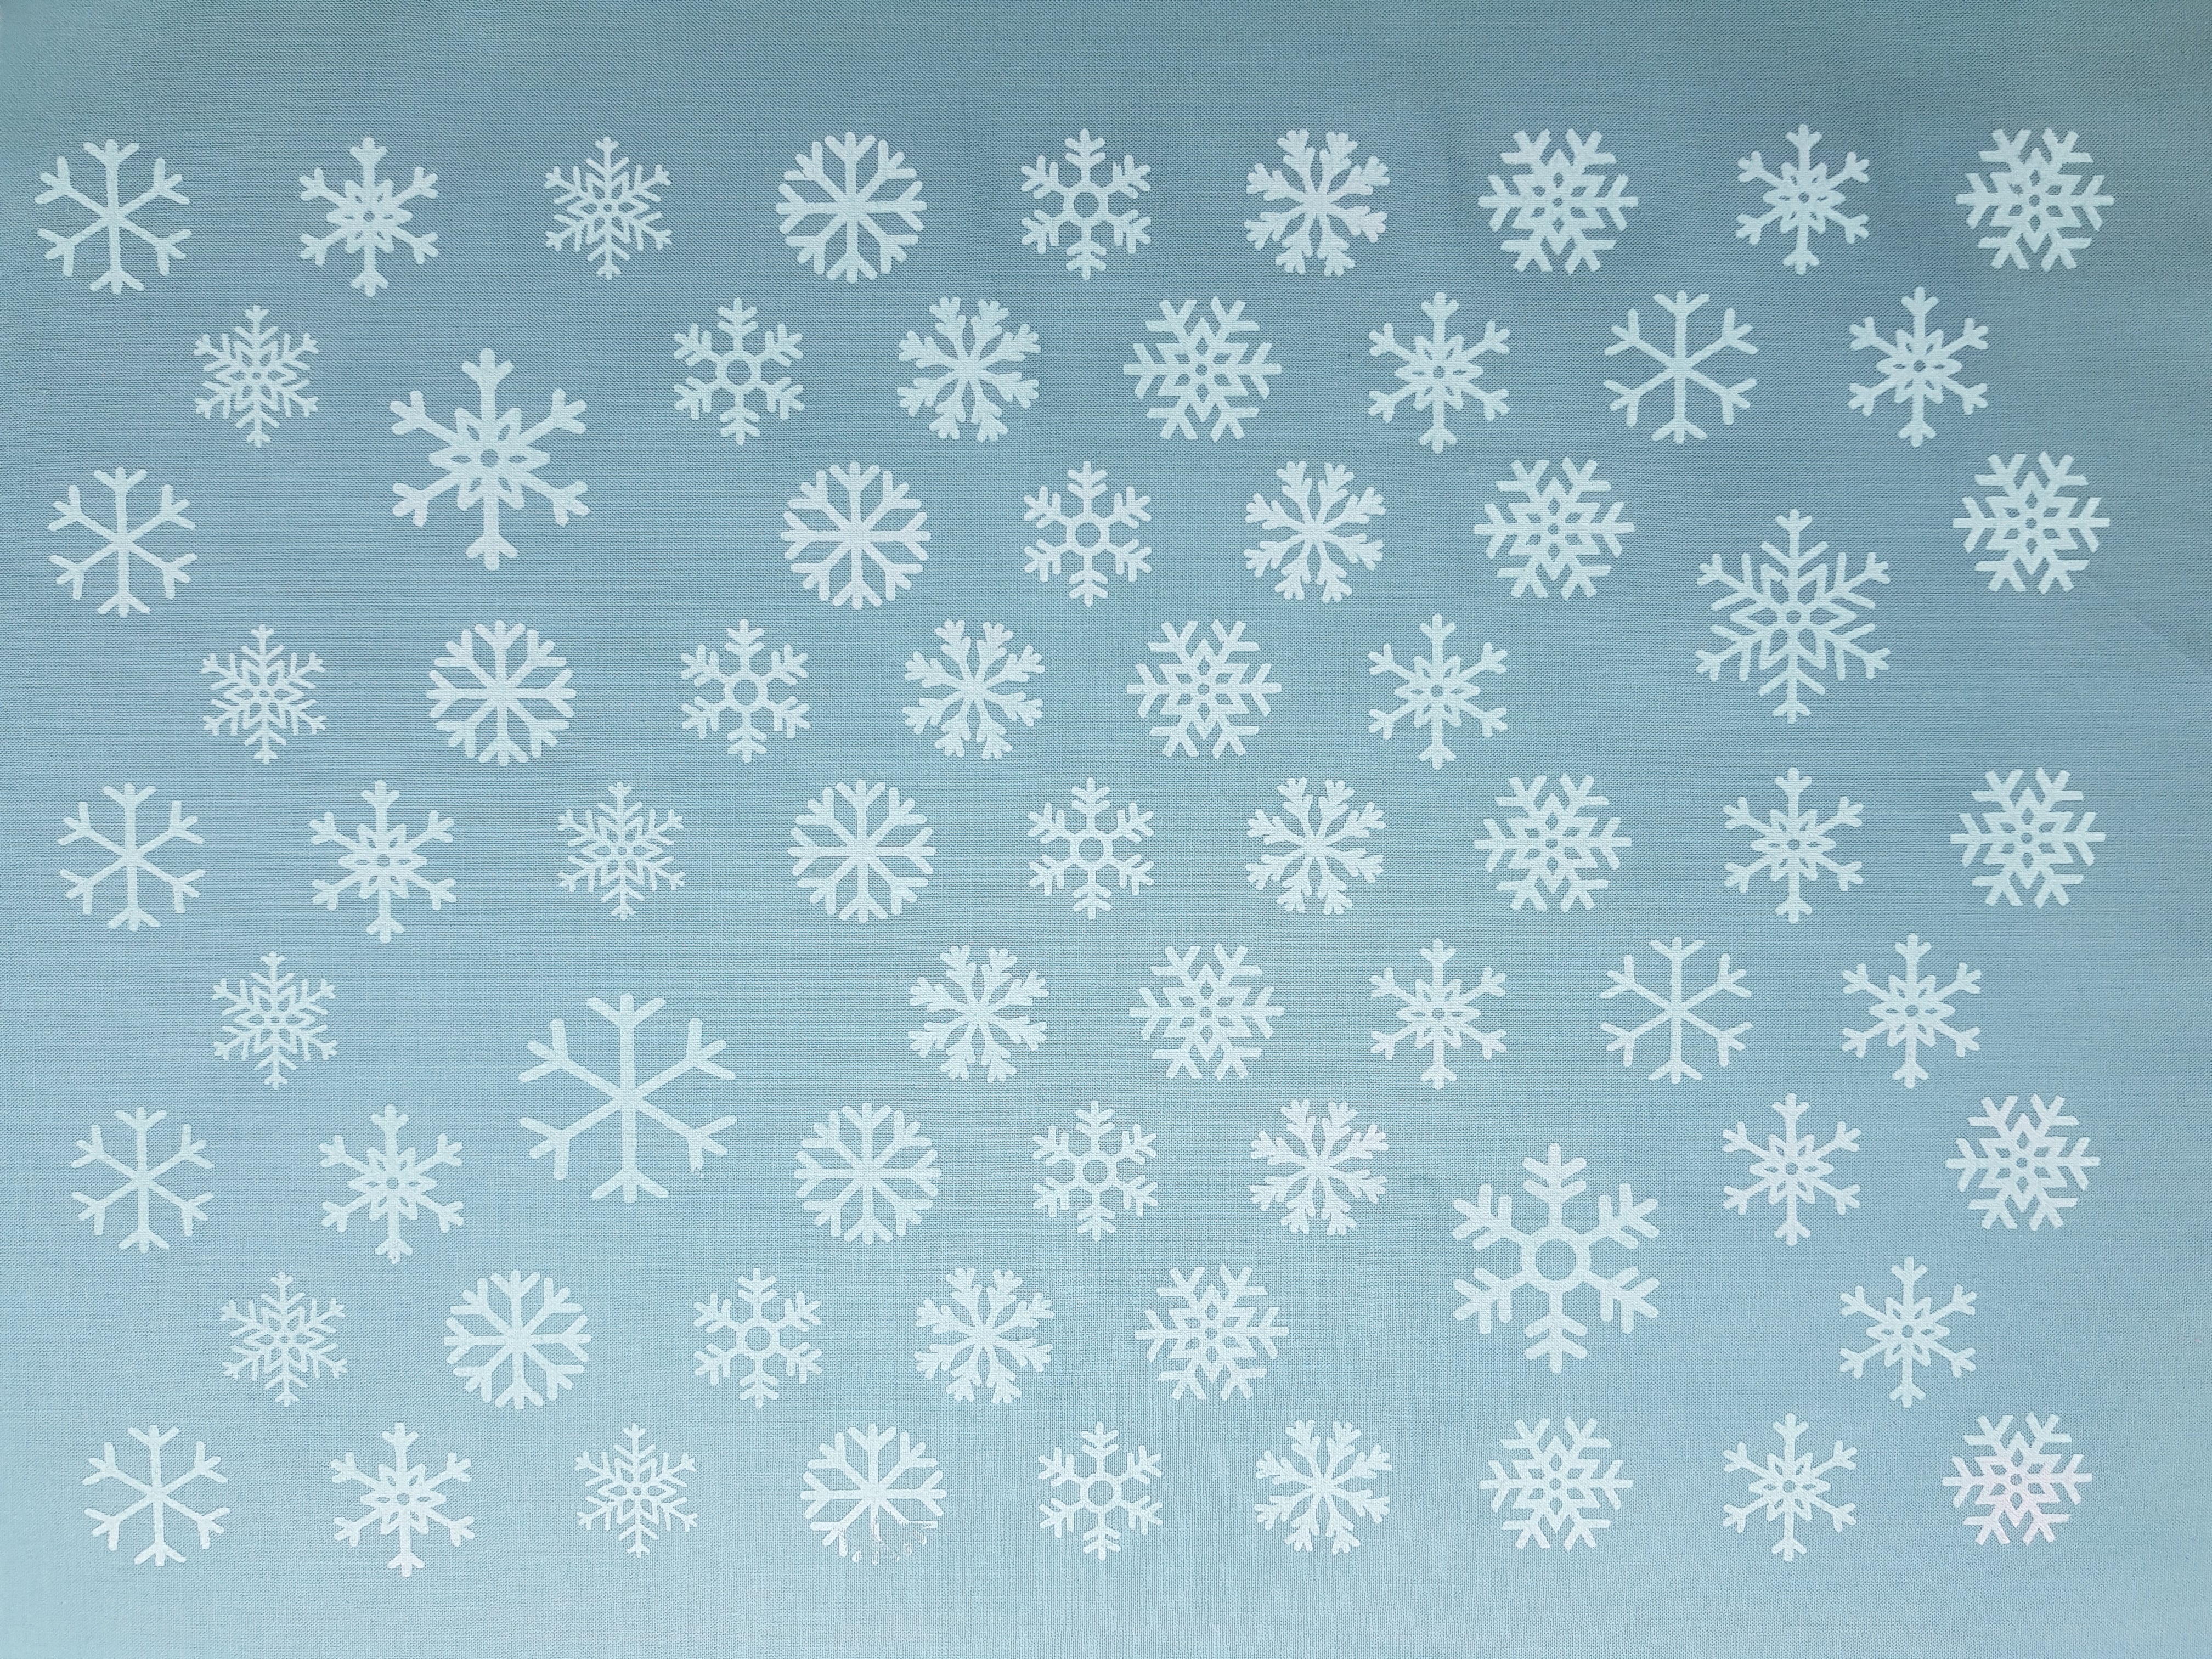 SNOWFLAKES - A snowflake is not just for Christmas - Screen Printed Kona Cotton Fabric - snowflakes